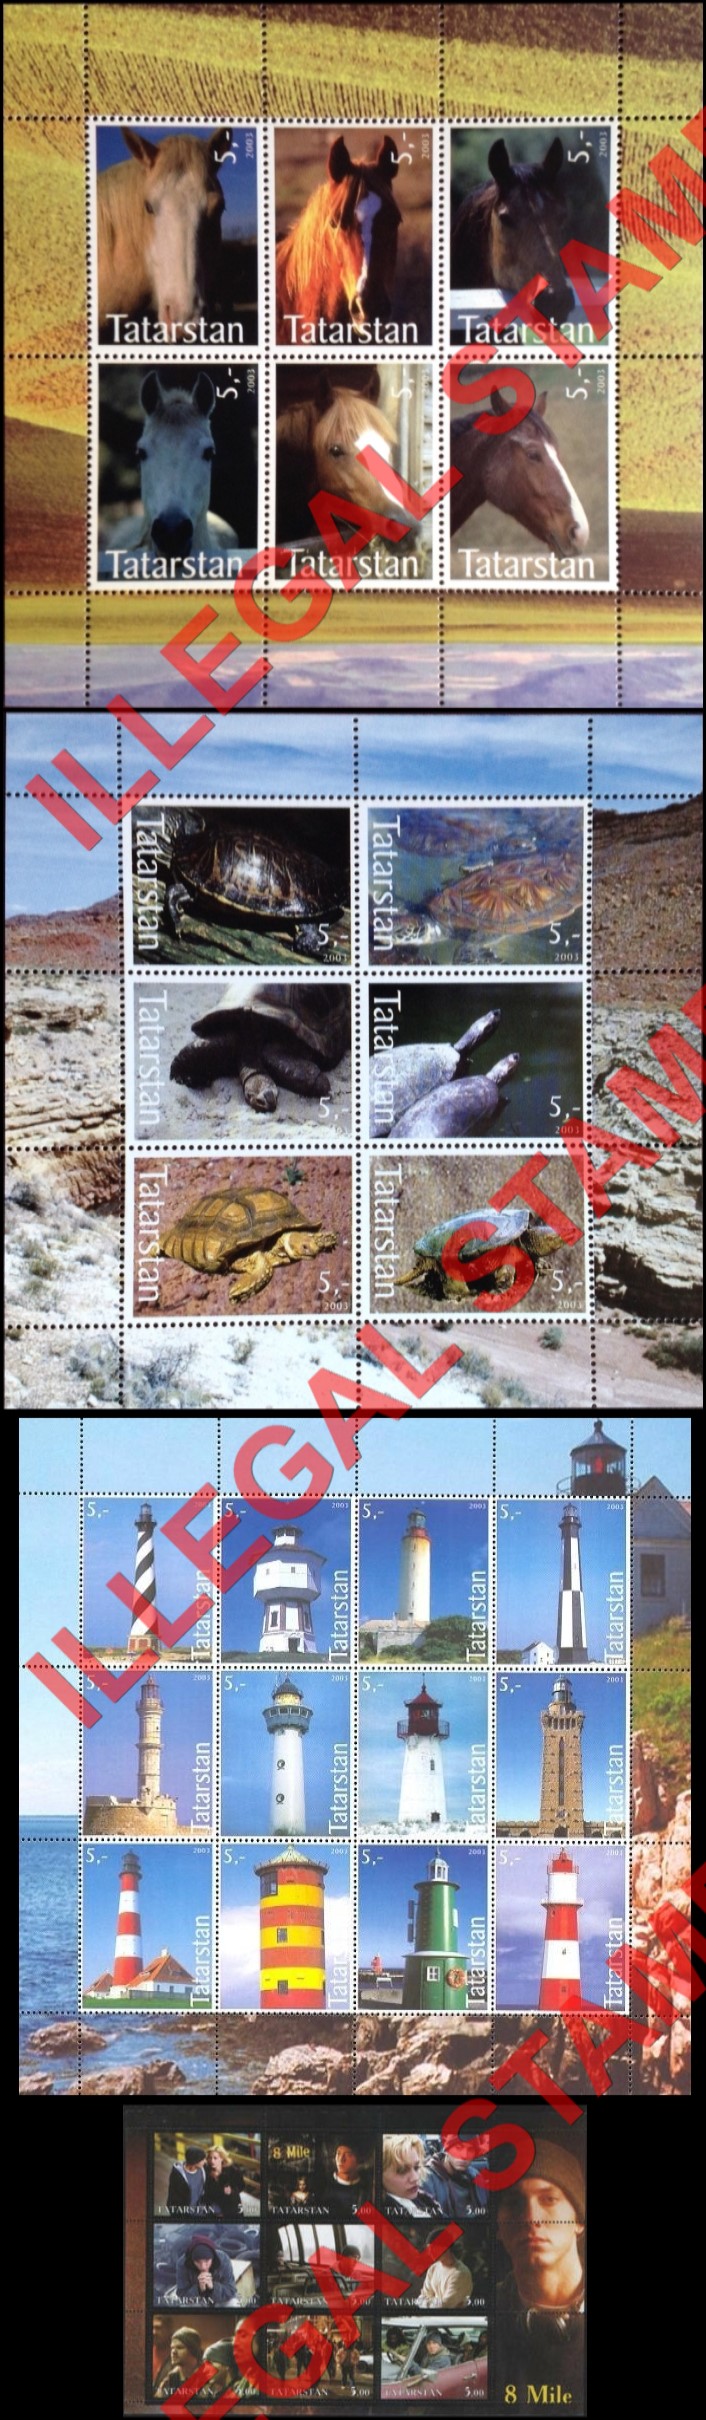 Republic of Tatarstan 2003 Counterfeit Illegal Stamps (Part 2)